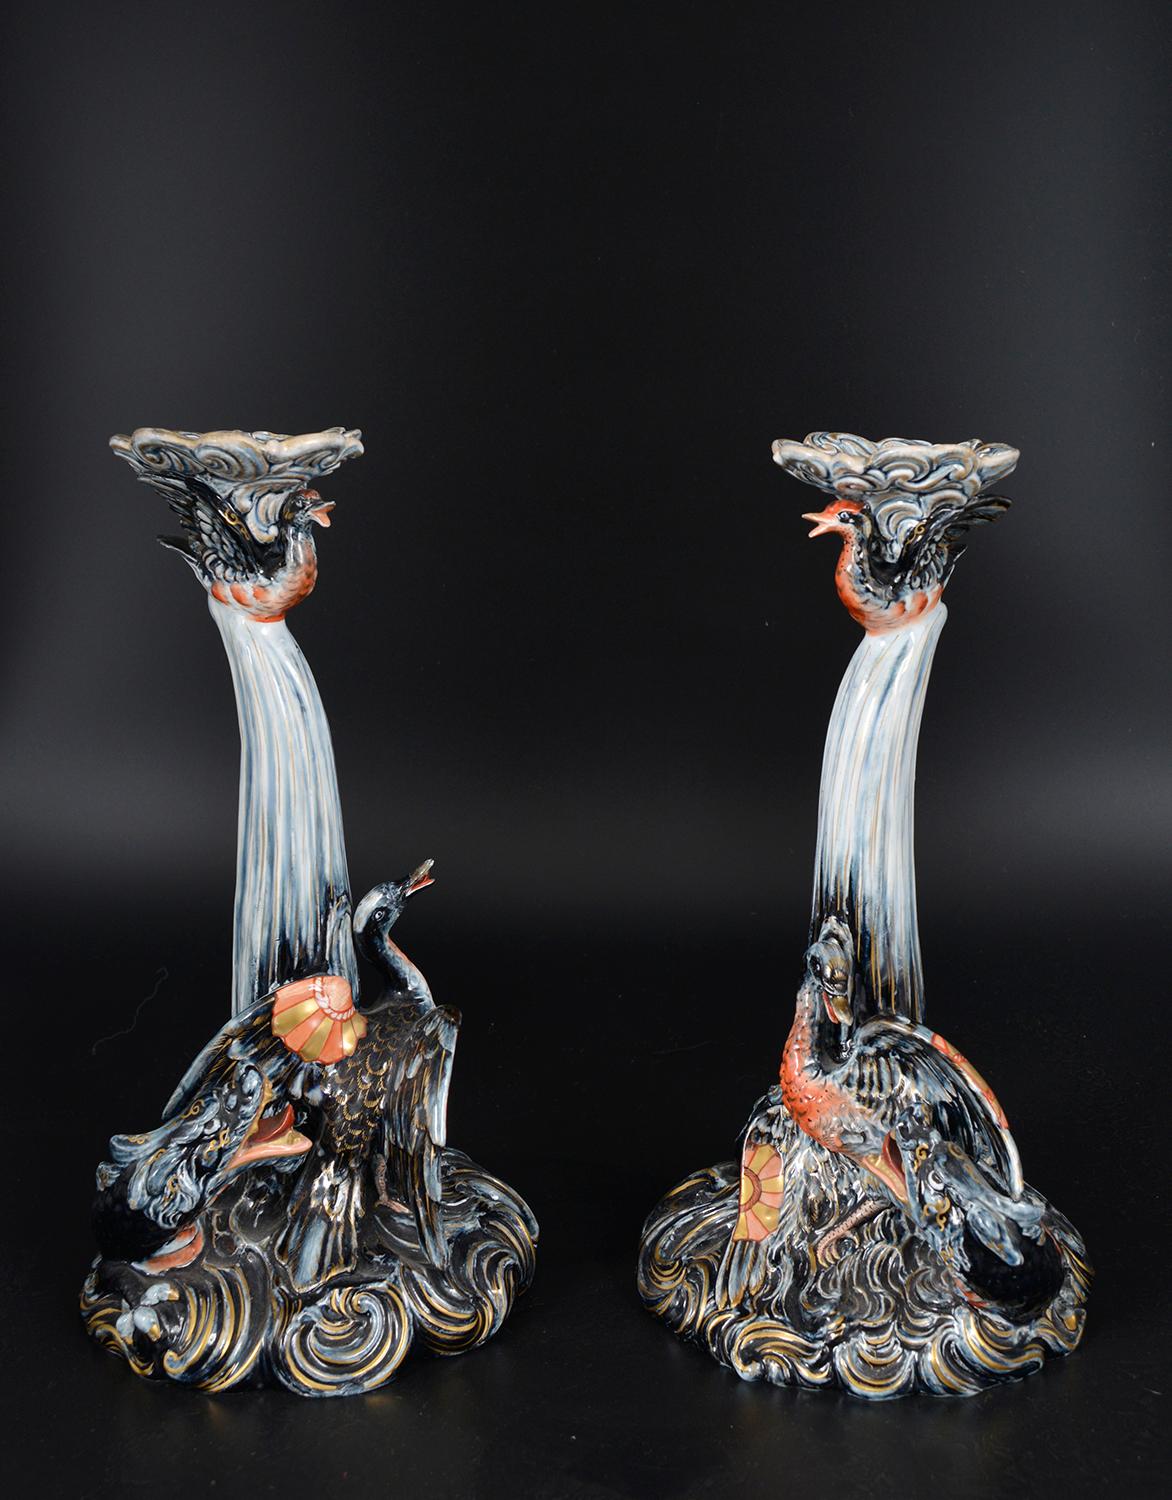 An outrageous pair of highly decorative French ceramic glazed pottery candlesticks by Keller & Guérin - the bases in the form of a sea dragon pursuing a bird. Japanese style signature Keller Et Guerin monogrammed to both bases. 
The Lunéville